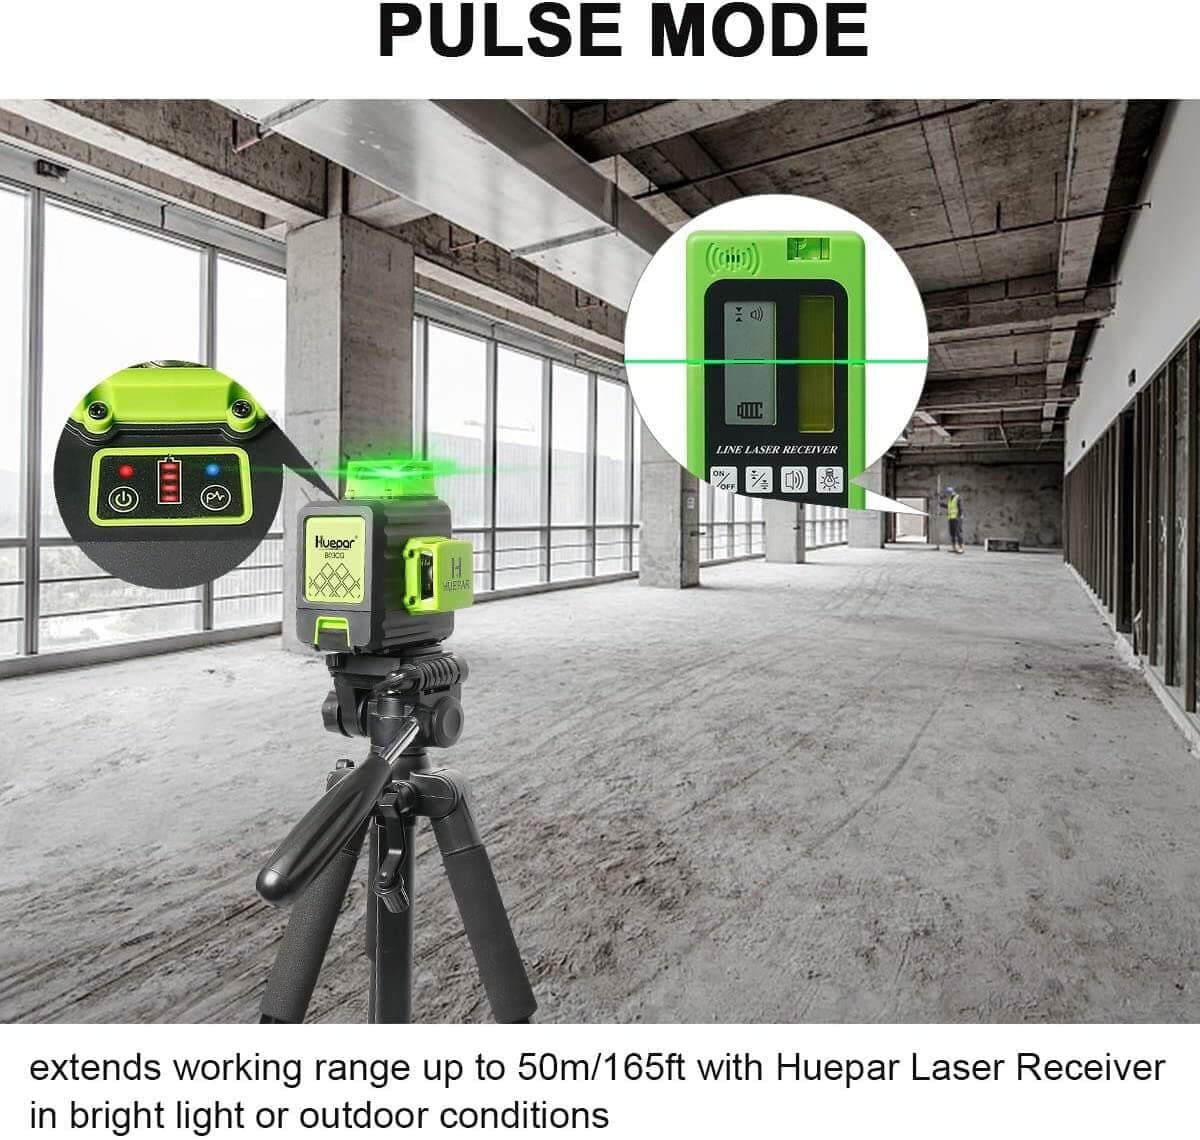 outdoor self-leveling lasers green beam cross